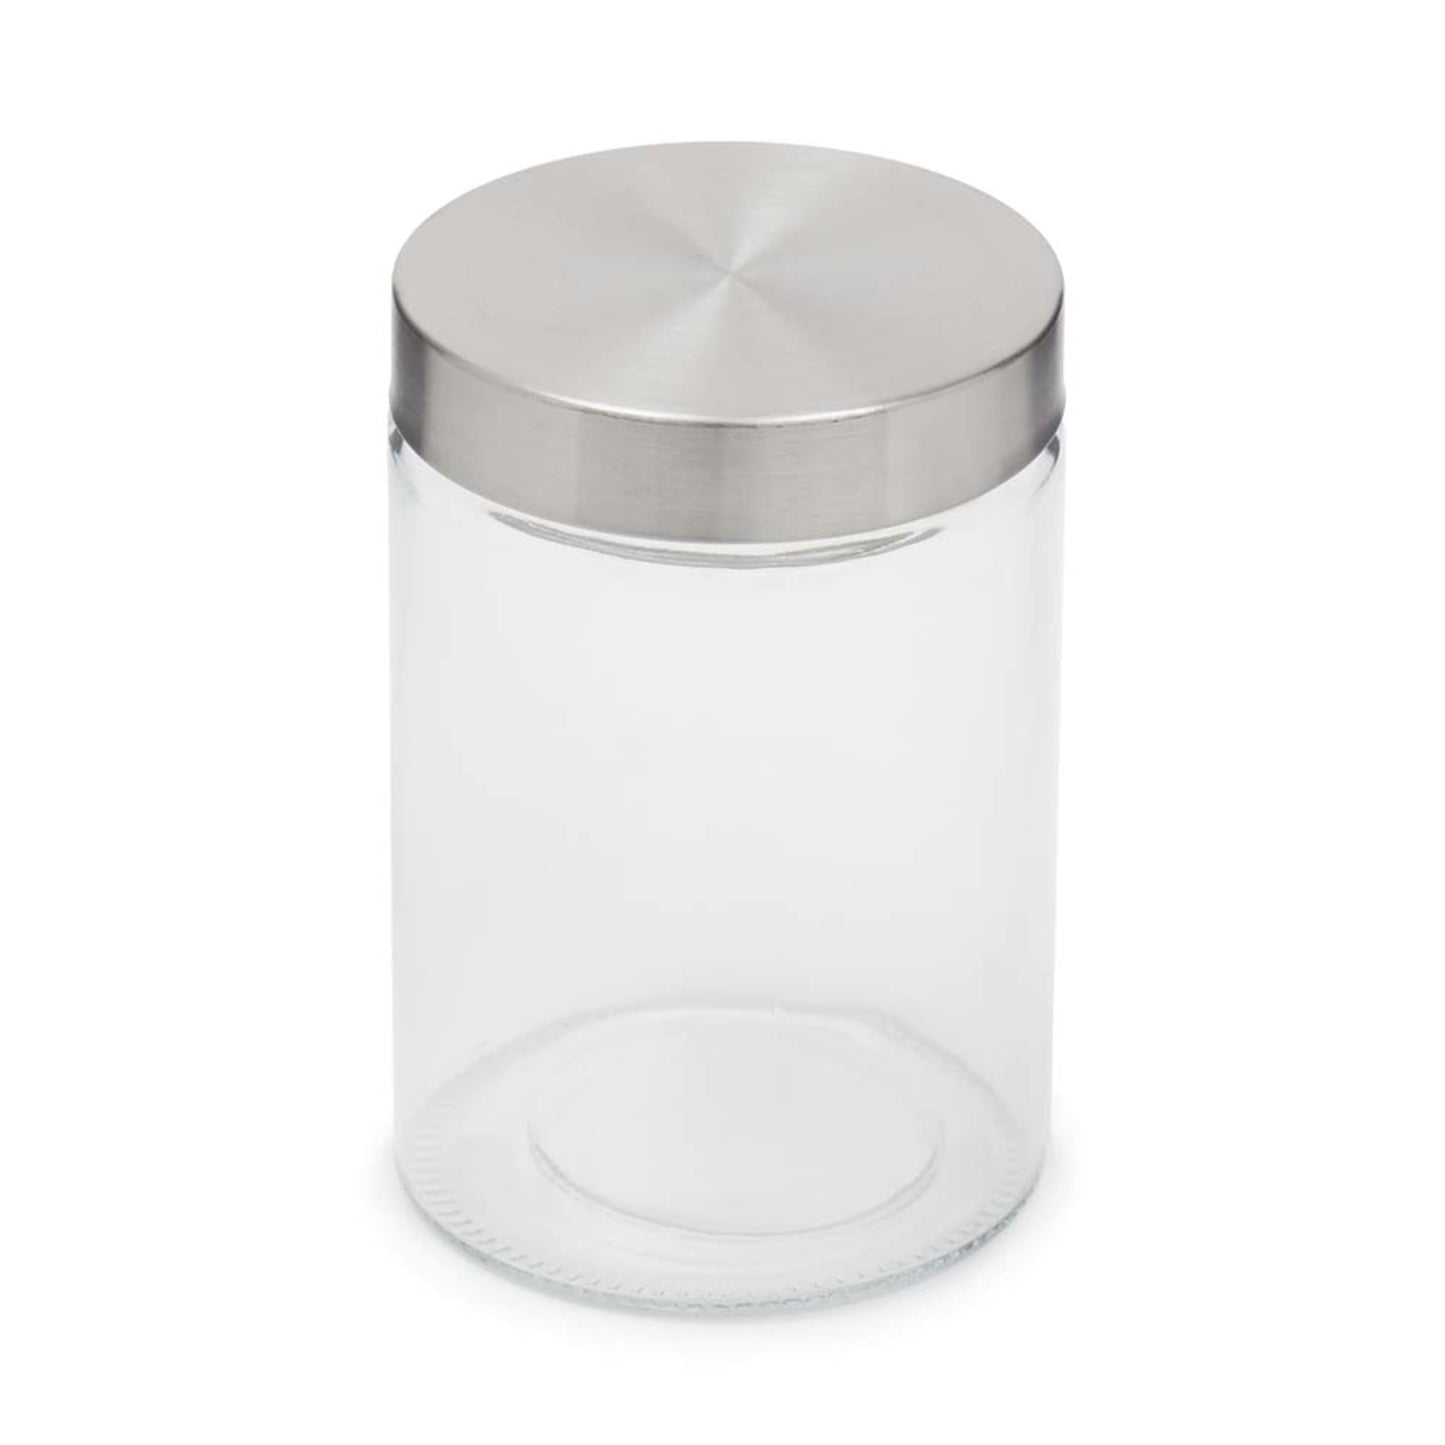 Medium 40 oz. Round Glass Canister with Air-Tight Stainless Steel Twist Top Lid, Clear